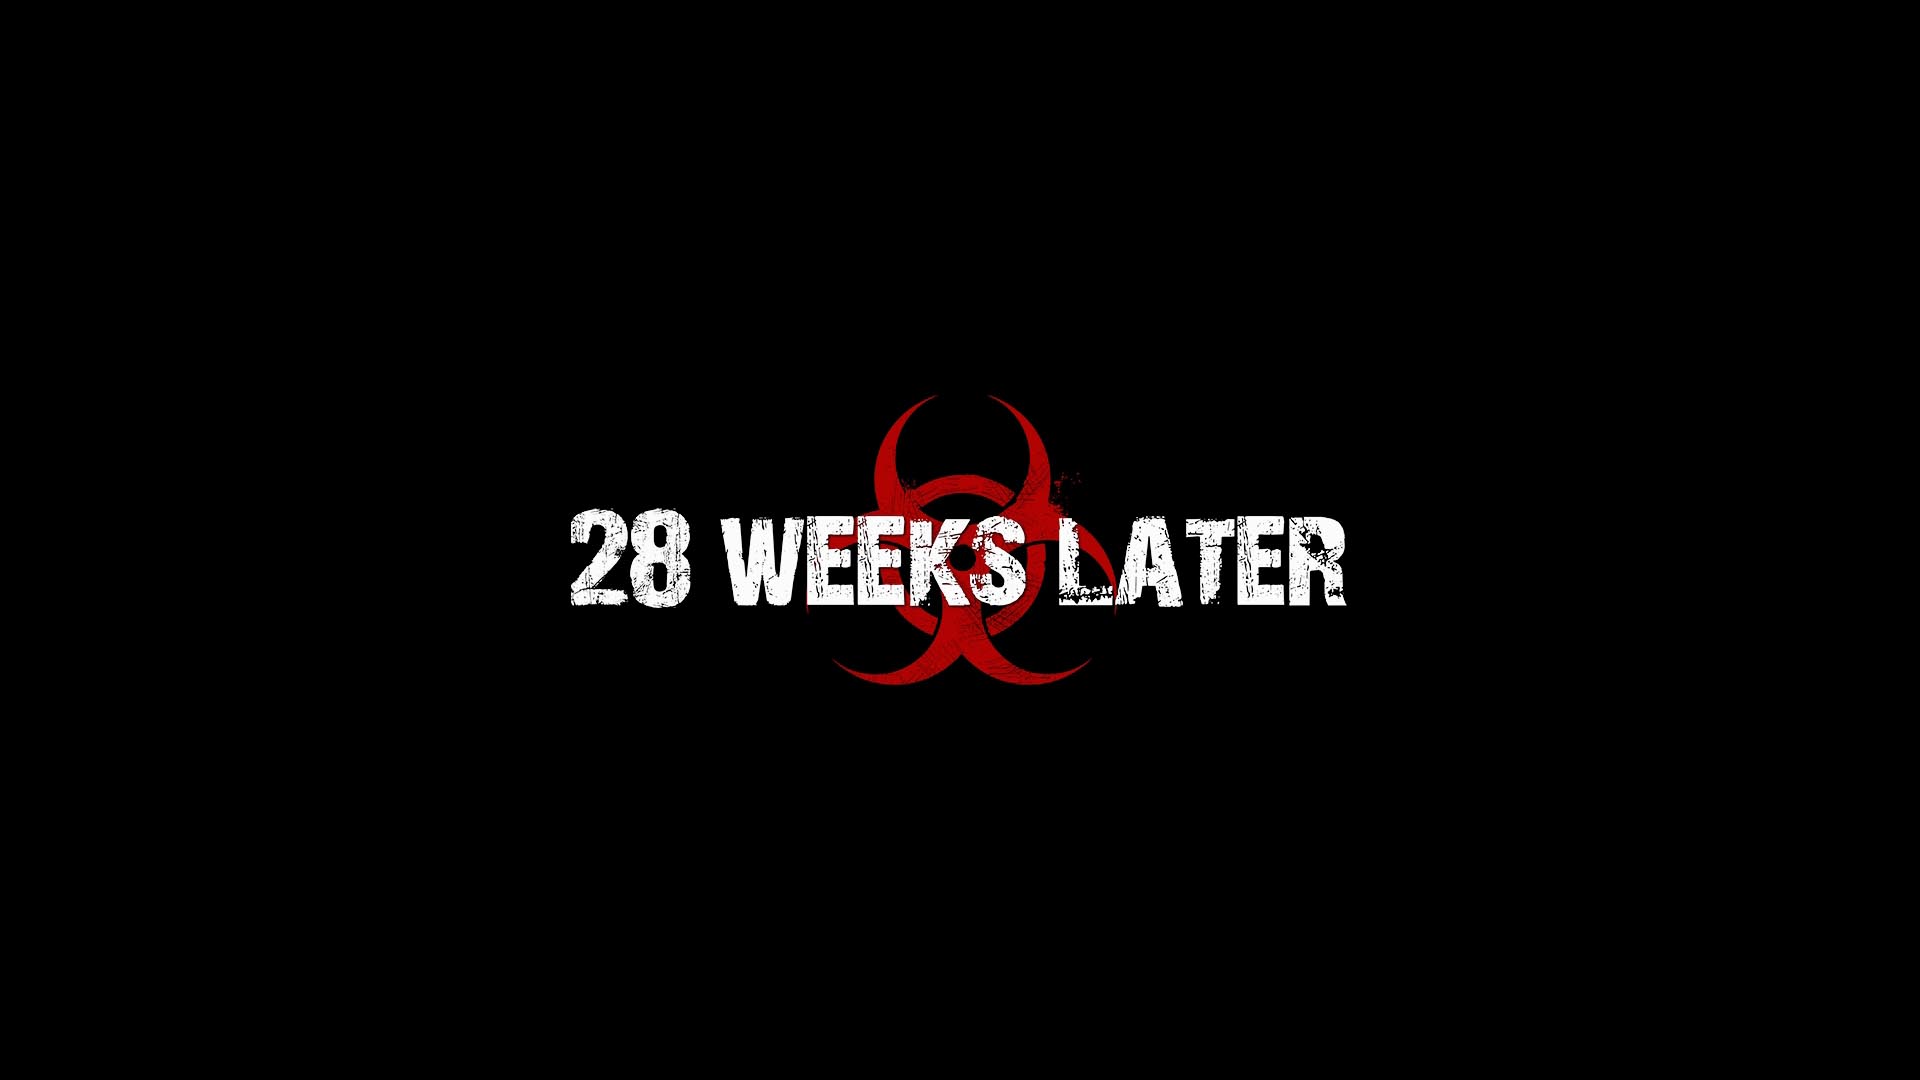 28 Weeks Later Full HD Wallpaper and Background Image | 1920x1080 | ID